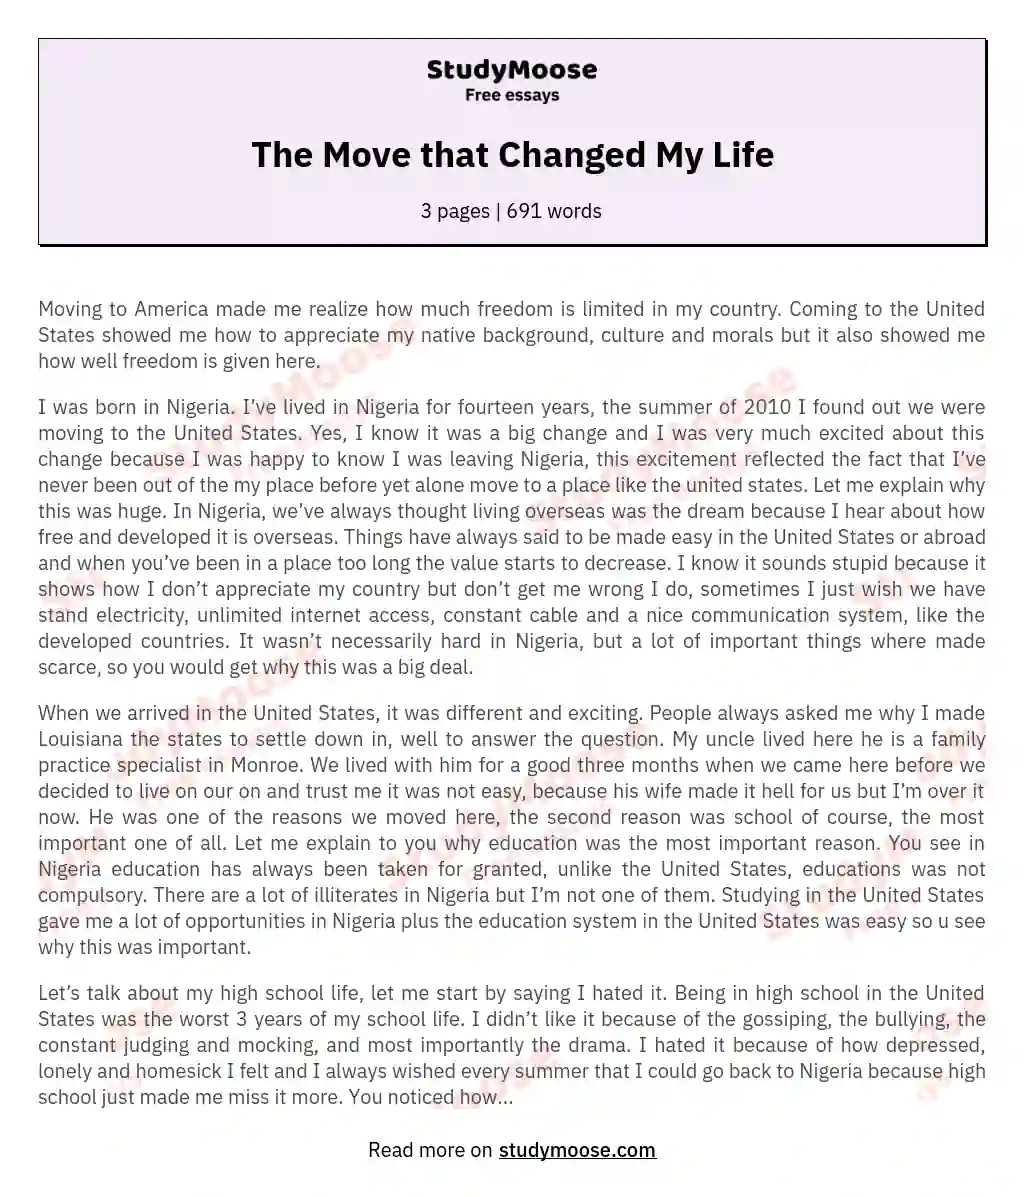 The Move that Changed My Life essay